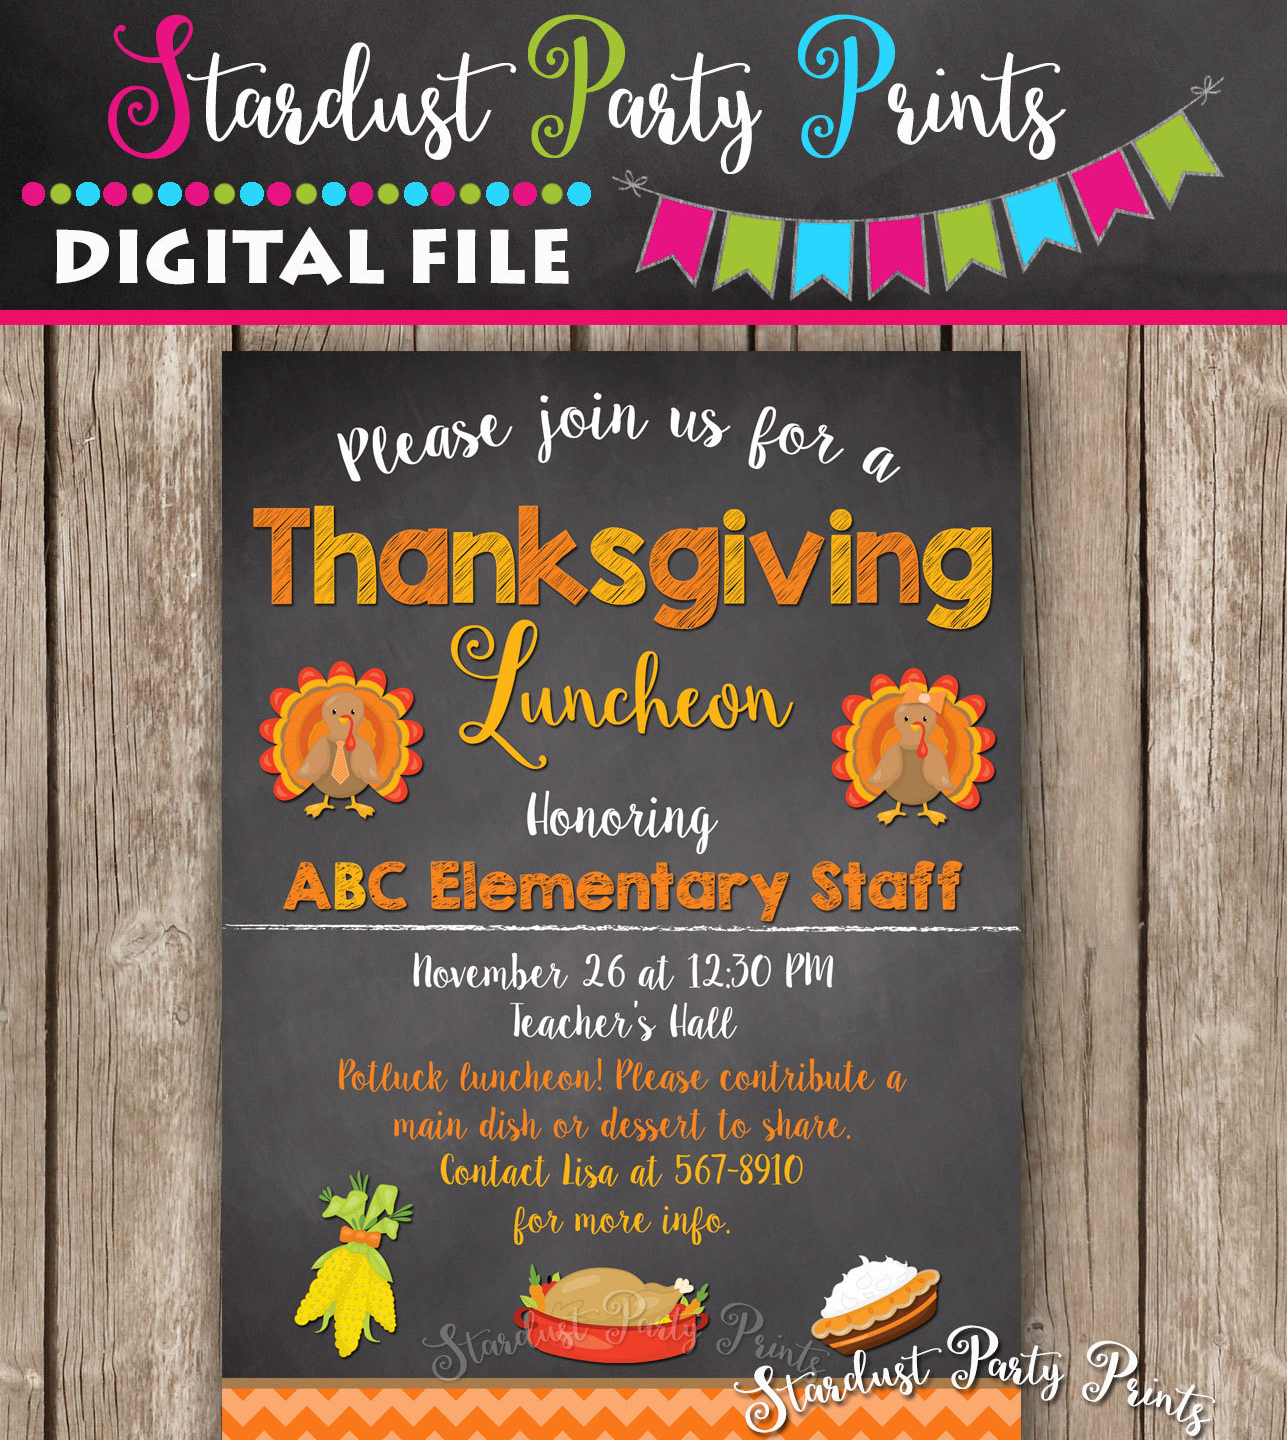 Luncheon Invitation - 15+ Examples, Format, Pdf | Examples